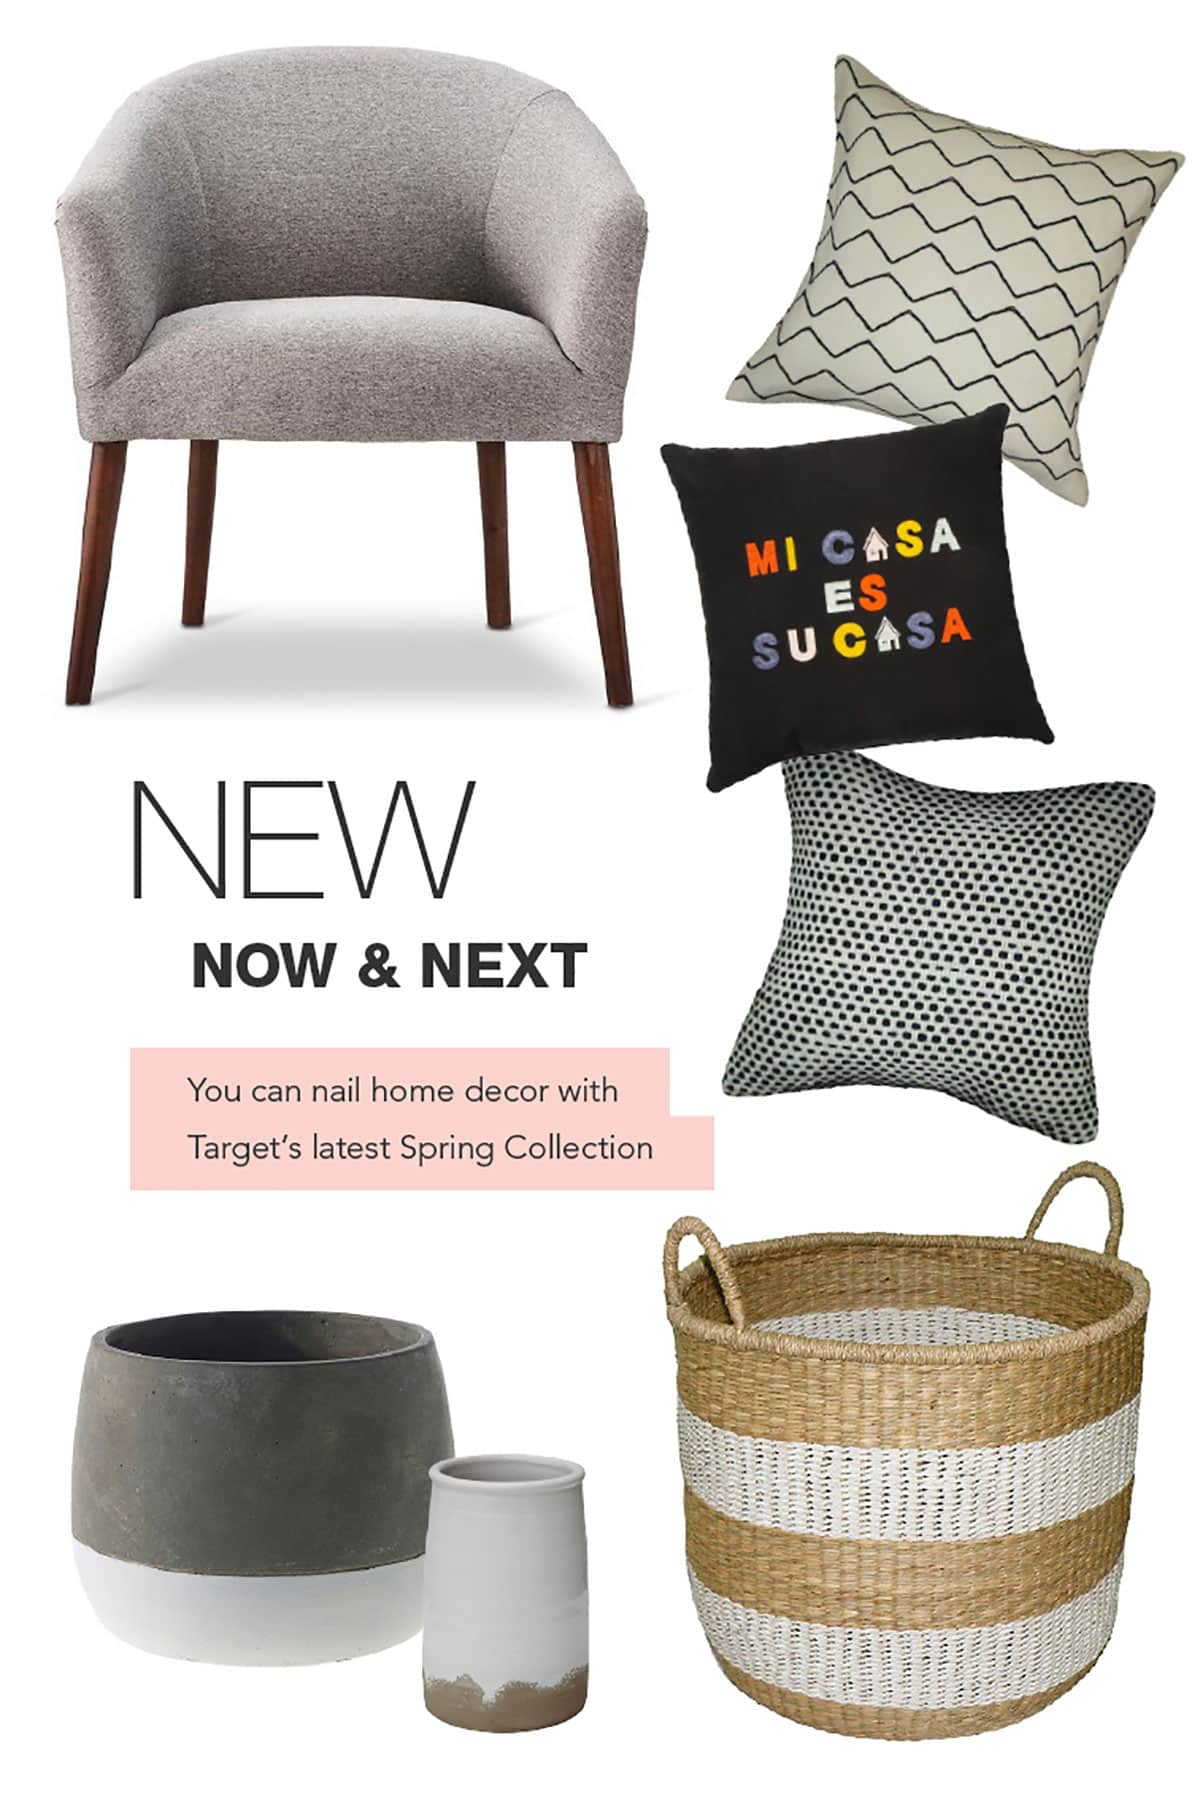 Affordable Mid Century Home Decor at Target